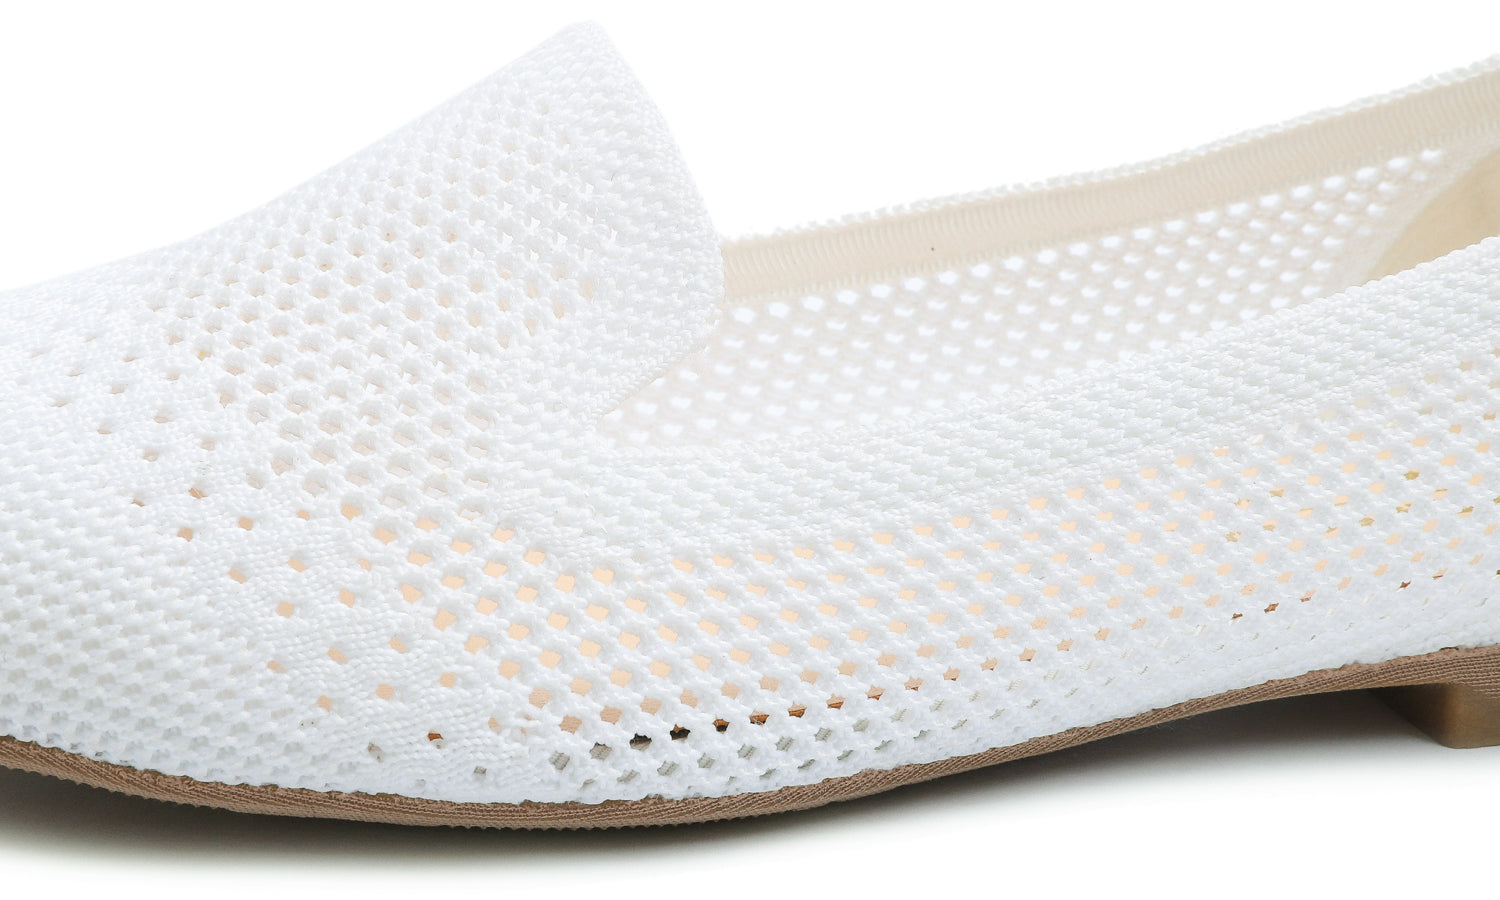 Feversole Women's Woven Fashion Breathable Knit Flat Shoes White Loafer